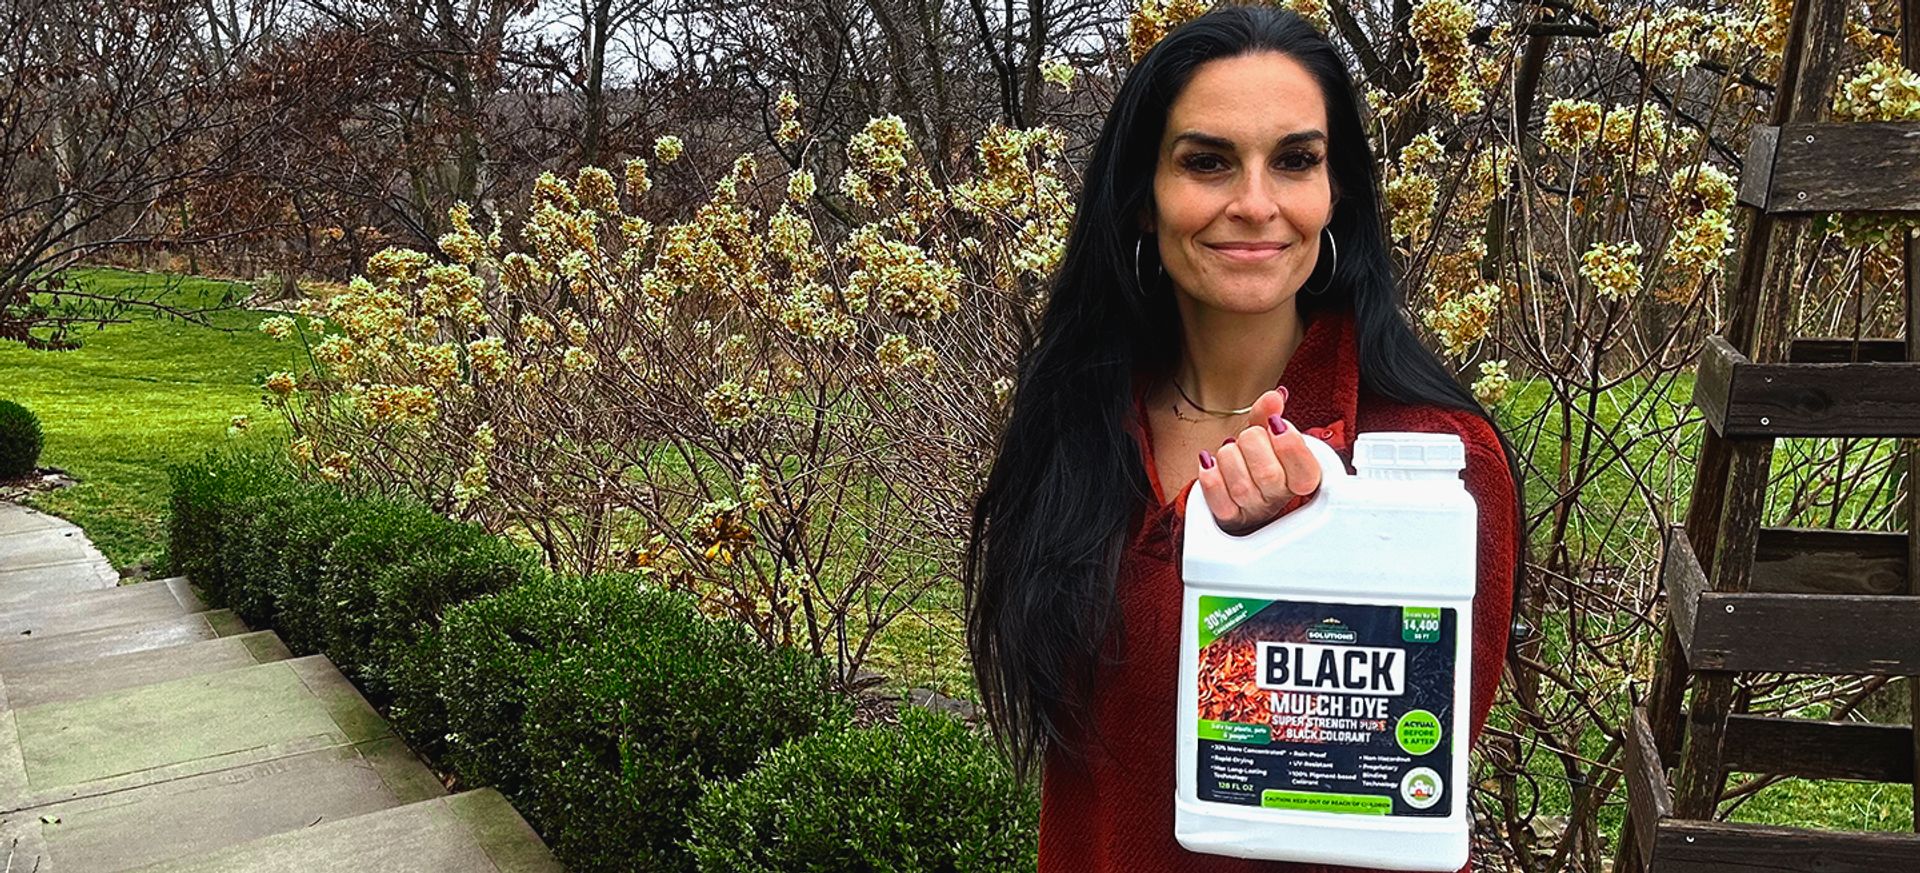 Get your garden game on with PetraMax Black Mulch Dye! Melissa's mul